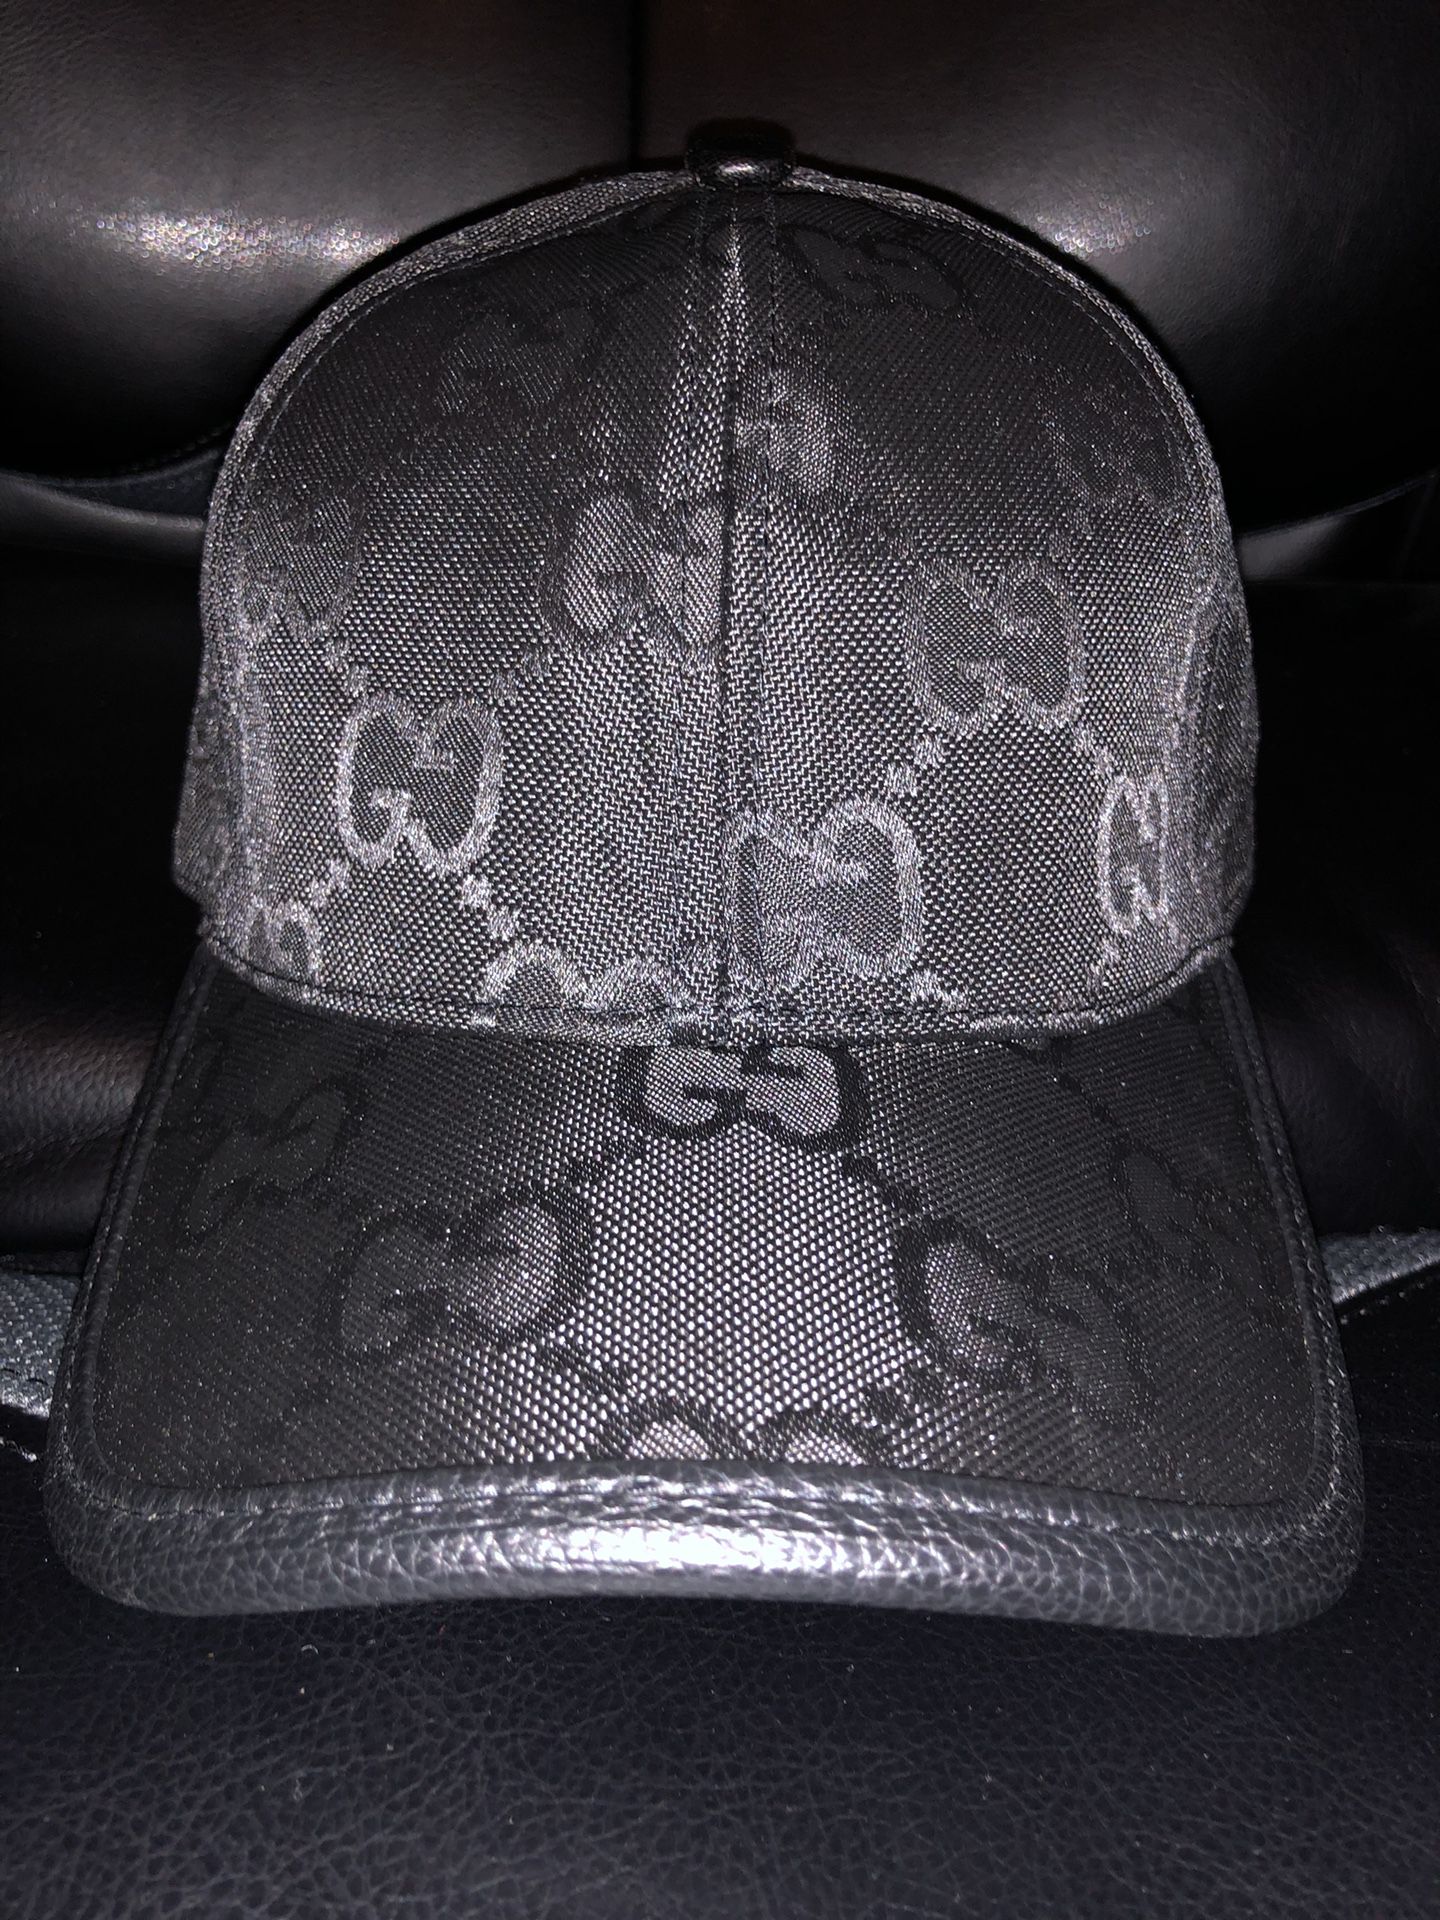 Custom Gucci Hat for Sale in Bay Shore, NY - OfferUp